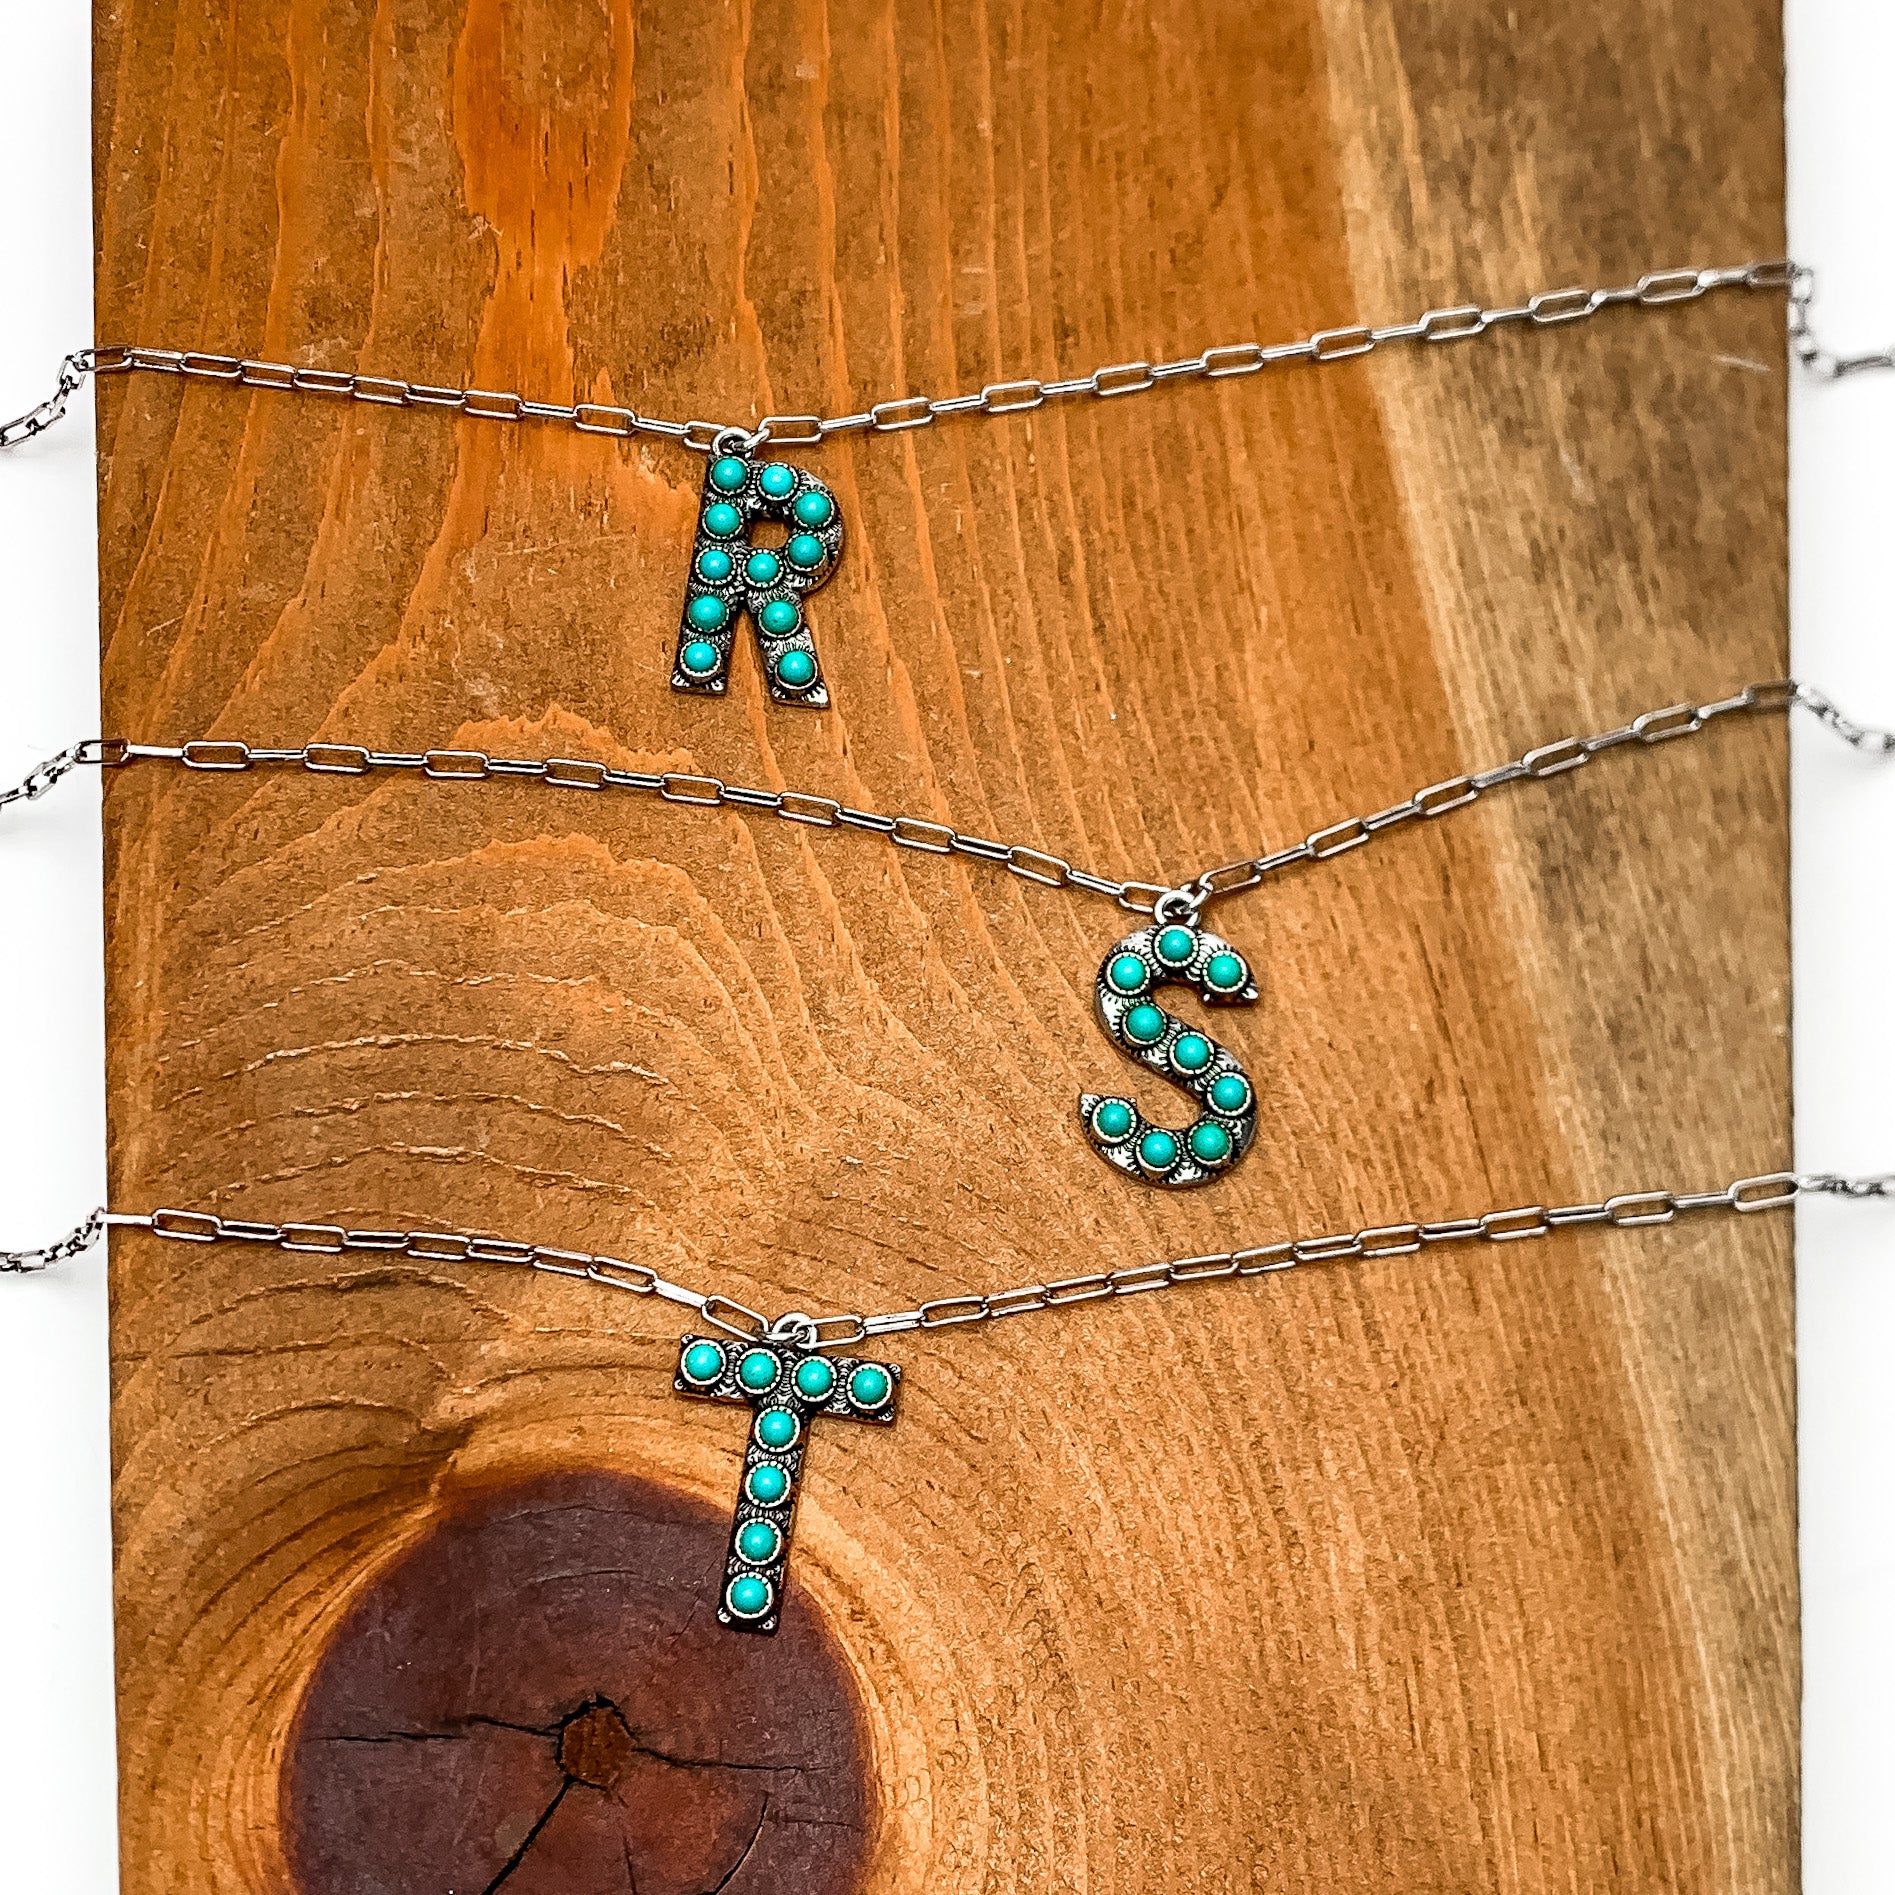 Wear It Proud Initial Necklaces in Turquoise - Giddy Up Glamour Boutique